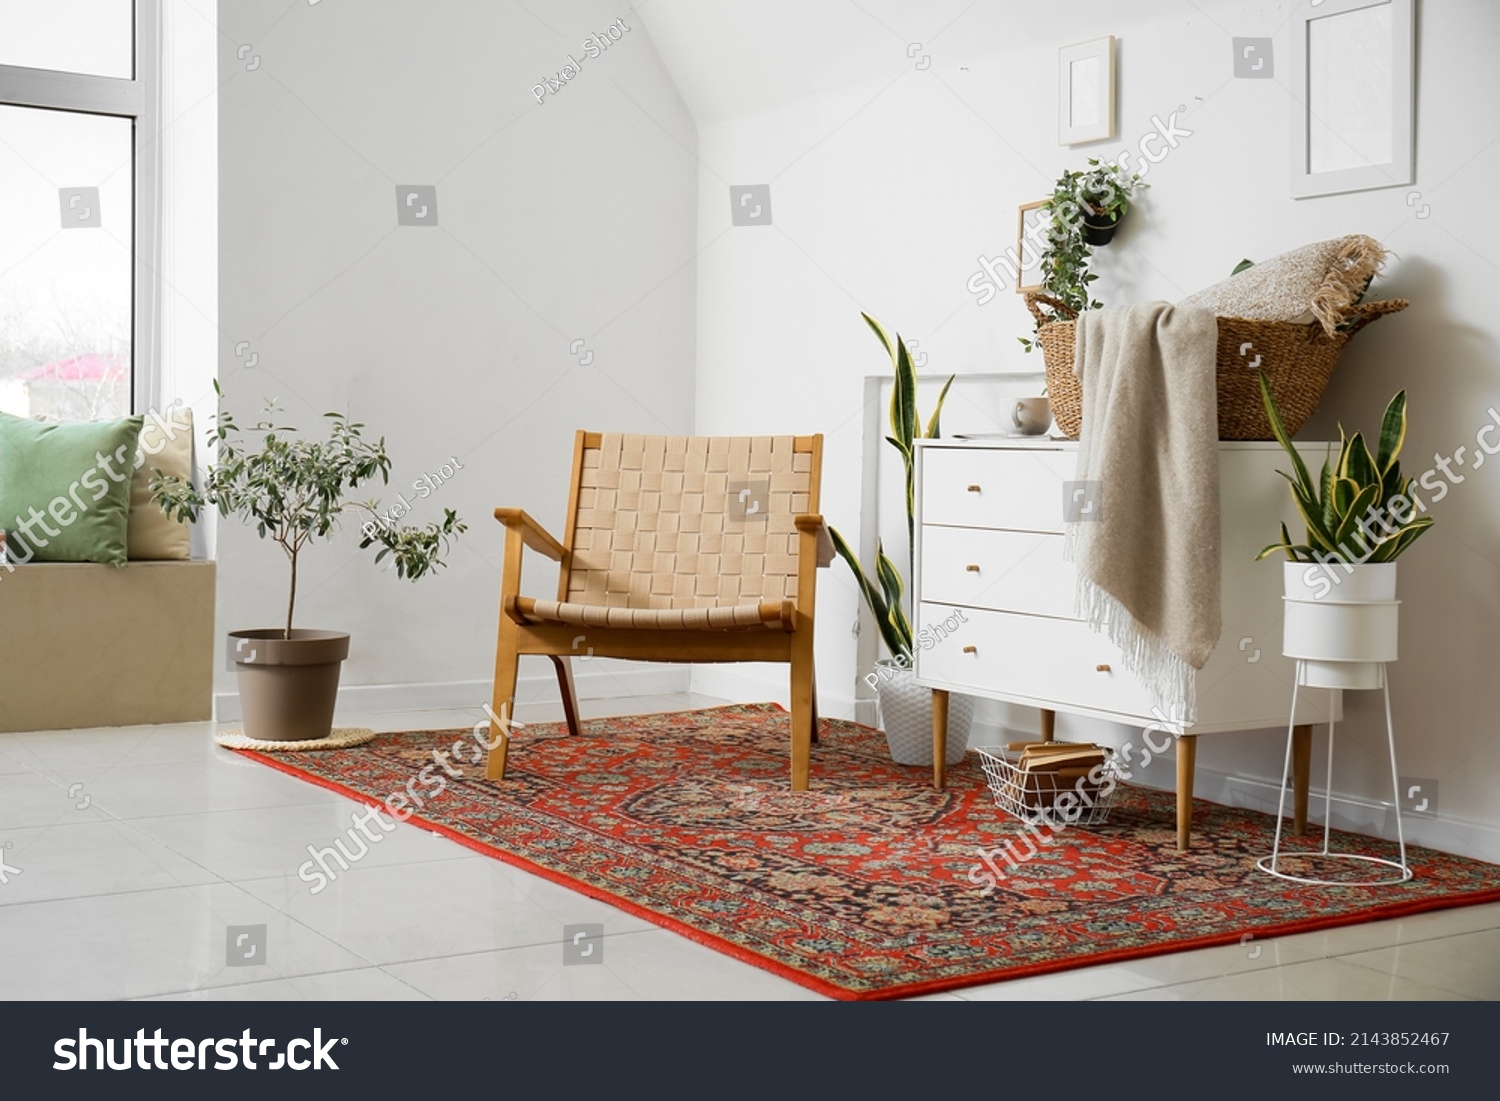 Interior of cozy living room with armchair, chest of drawers and vintage carpet #2143852467